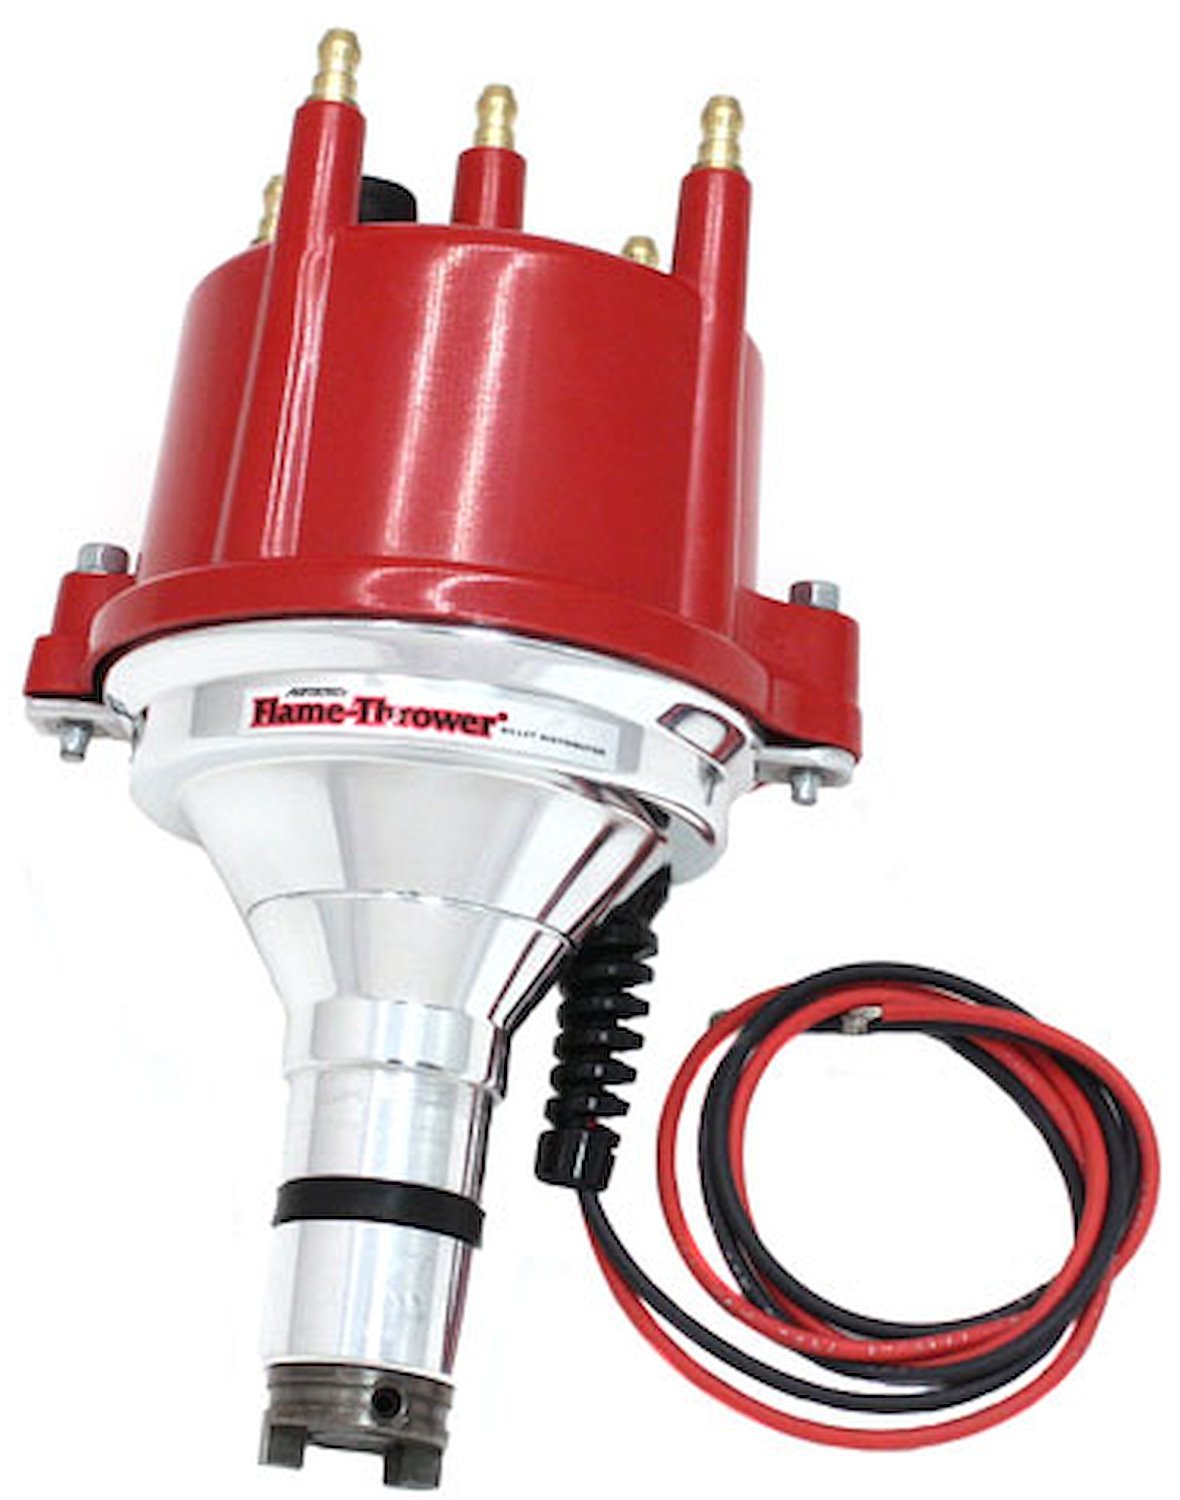 Flame Thrower Cast Distributor British A/B, 25D 4